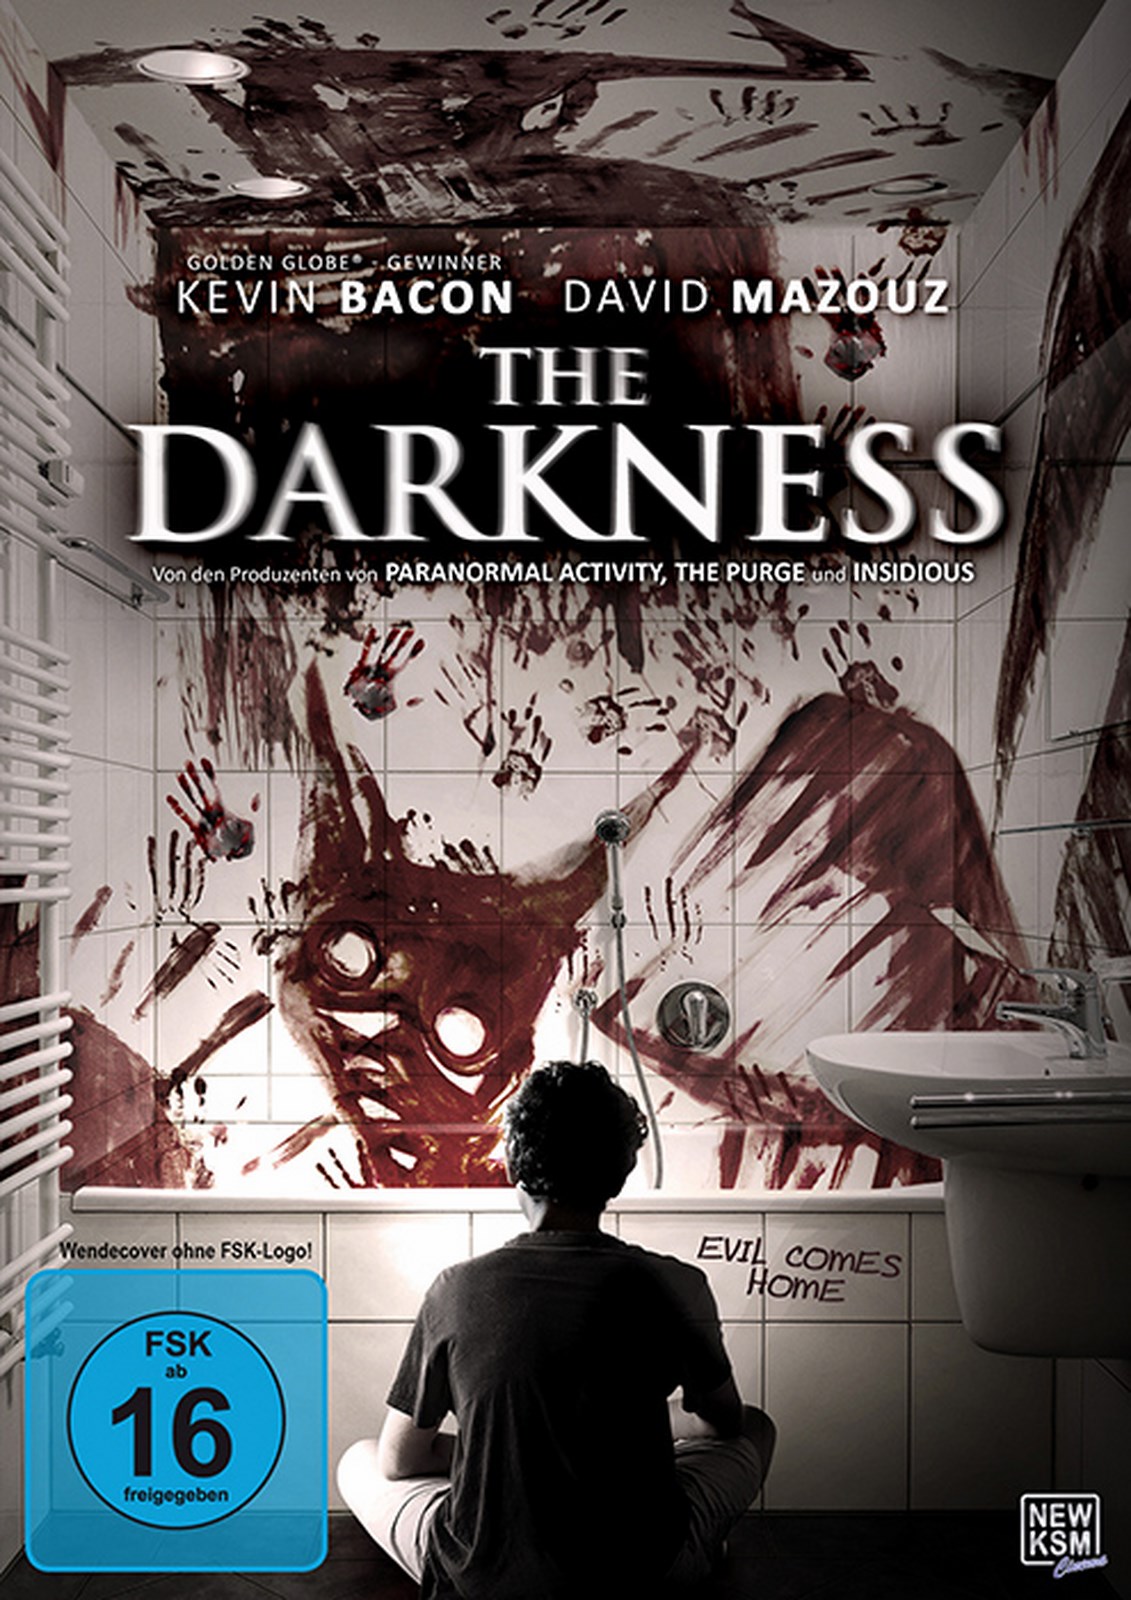 The Darkness in DVD The Darkness Evil Comes Home FILMSTARTS.de